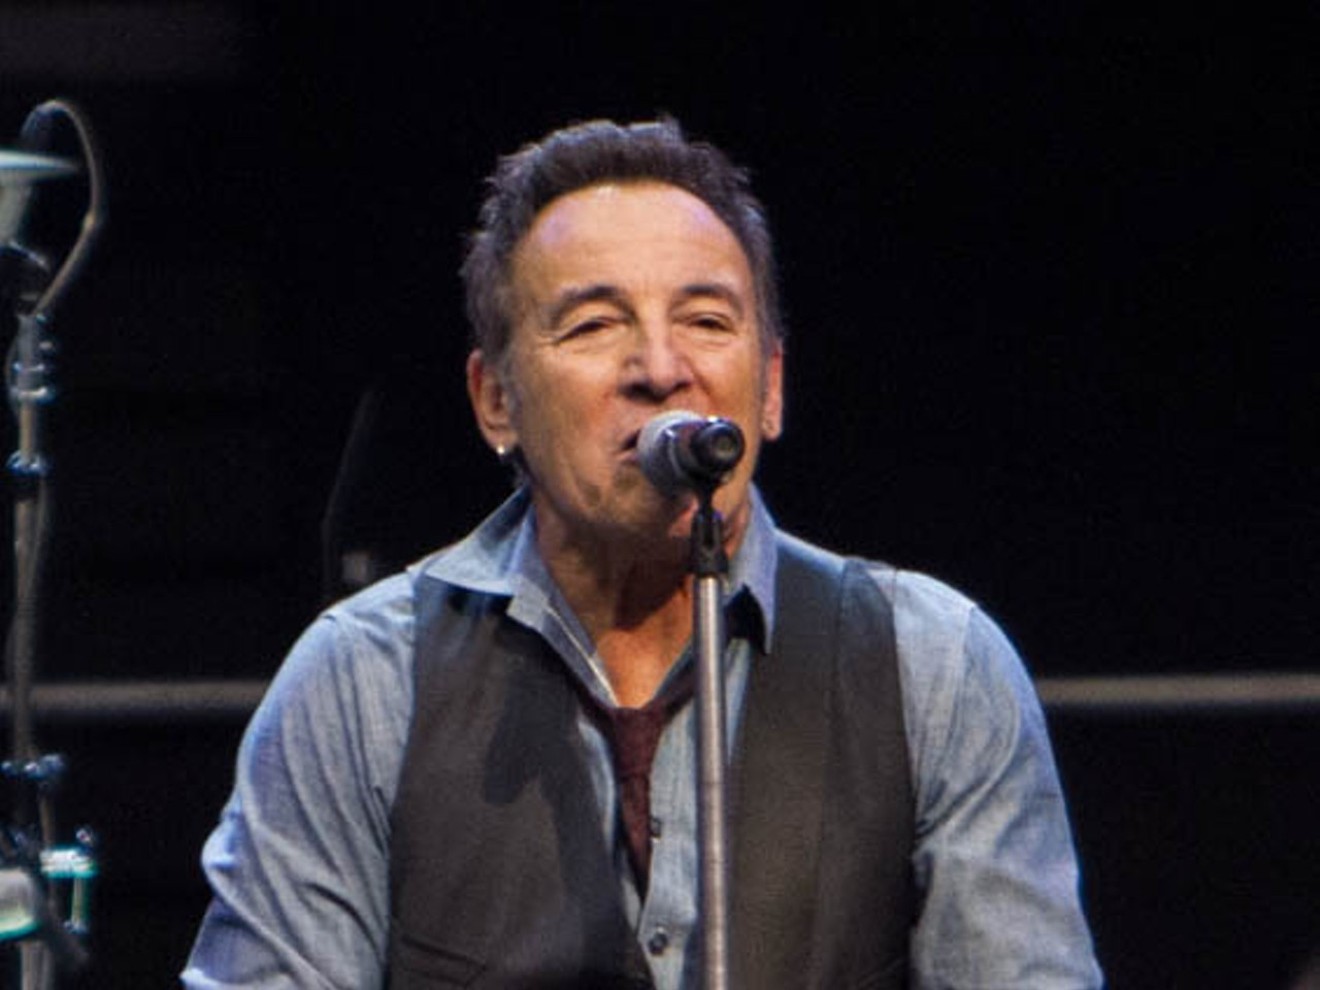 Bruce Springsteen and the E Street Band play Jobing.com Arena (now Desert Diamond Arena) on Dec. 6, 2012.